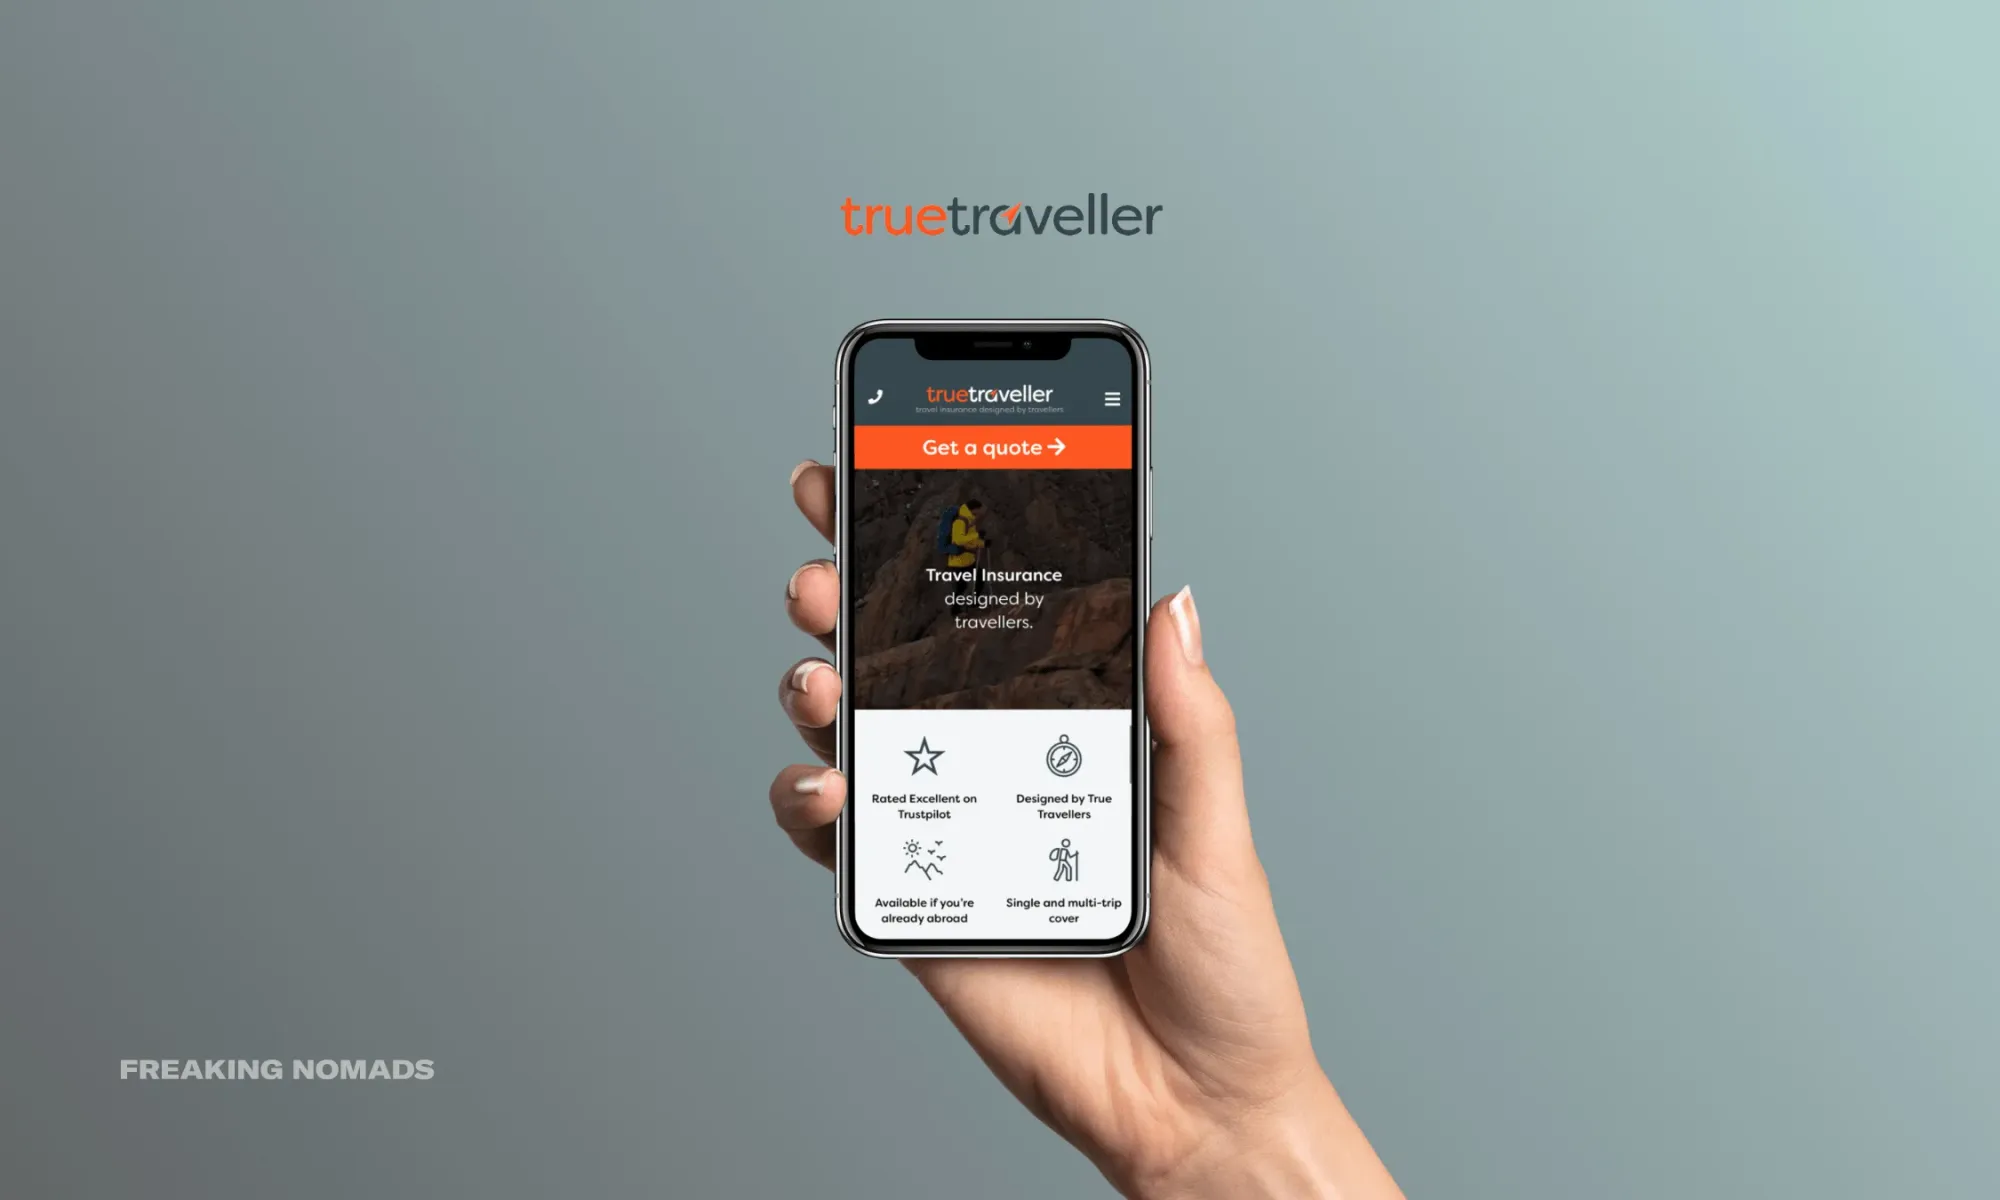 True Traveller Travel Insurance website on a phone held by a human hand